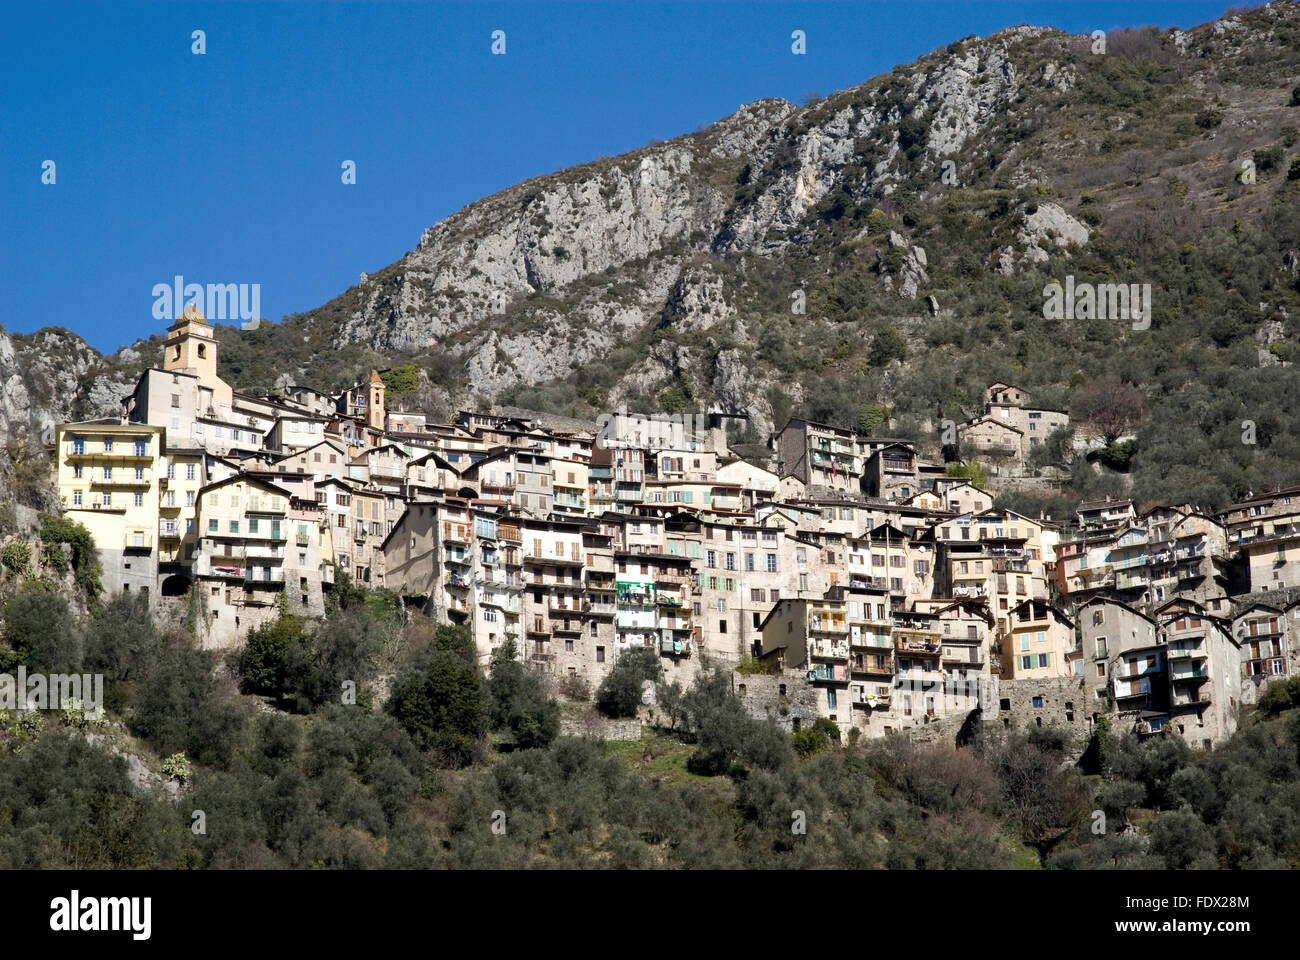 Saorge, Alpes Maritimes, France. Saorge is a very beautiful medieval village perched along a narrow rock spur in French Alps Stock Photo